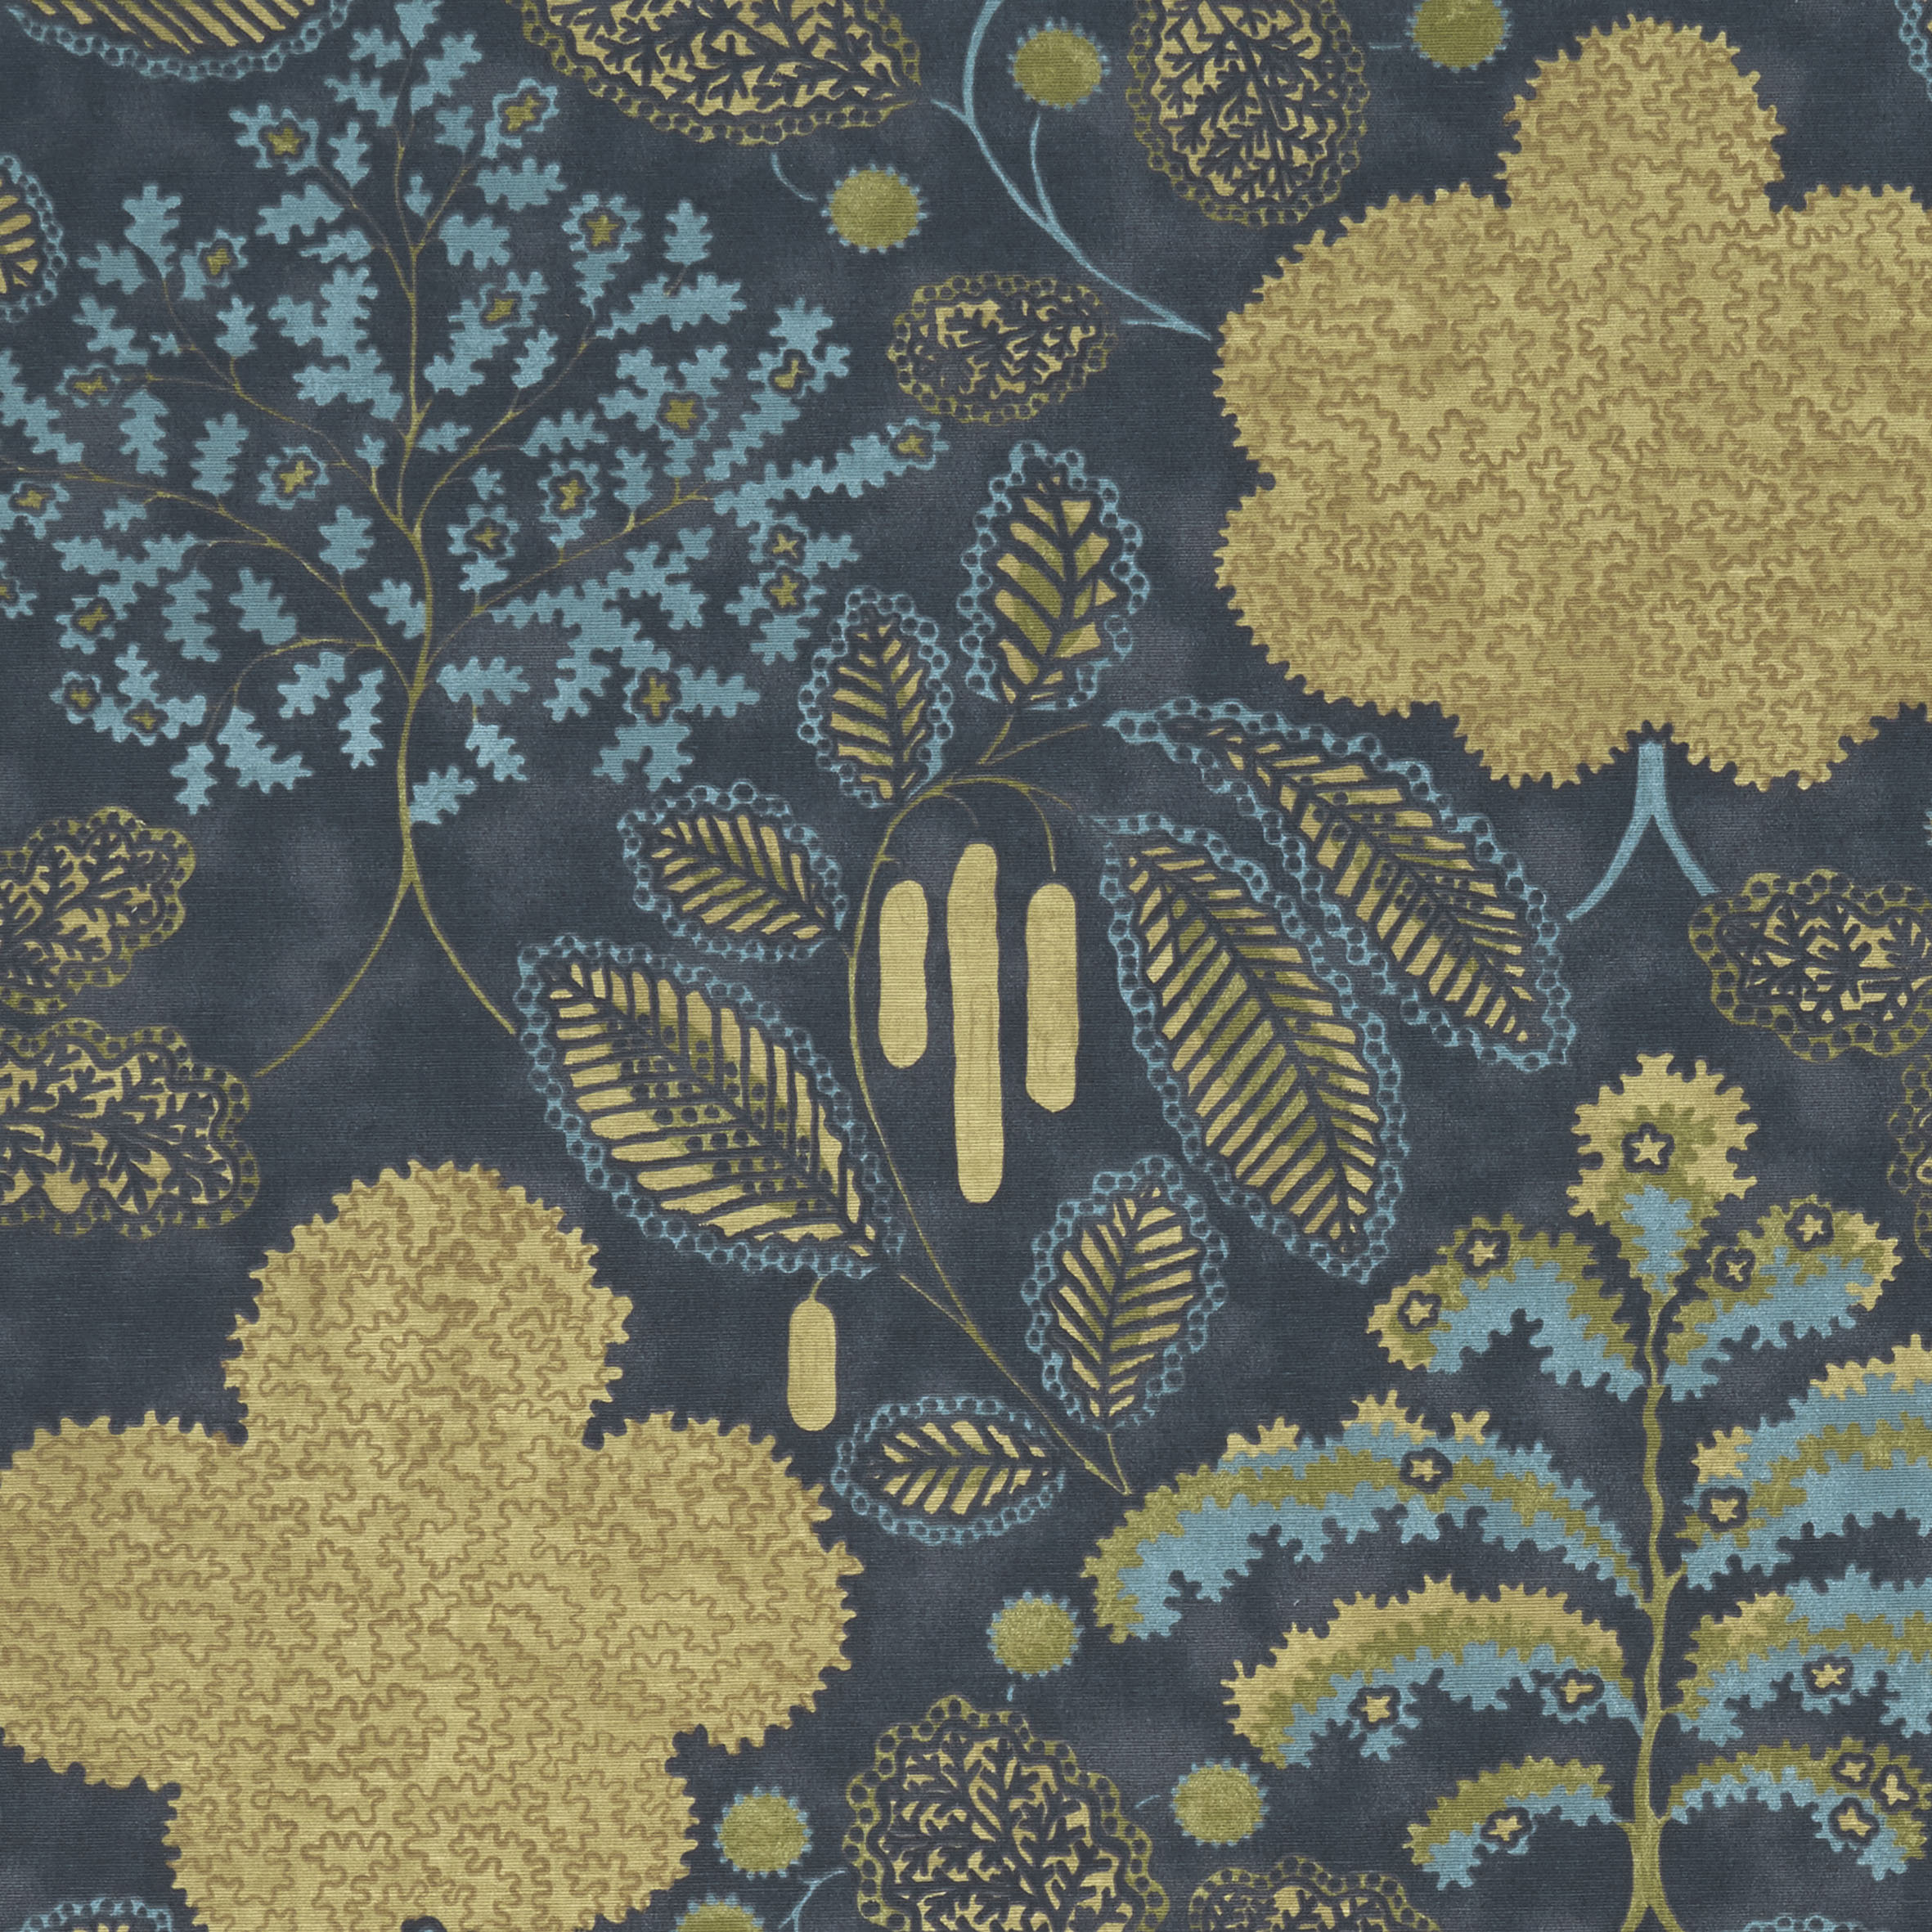 Close up of teal and gold leaf patterned fabric sample. - Blinds Norfolk - Norwich Sunblinds